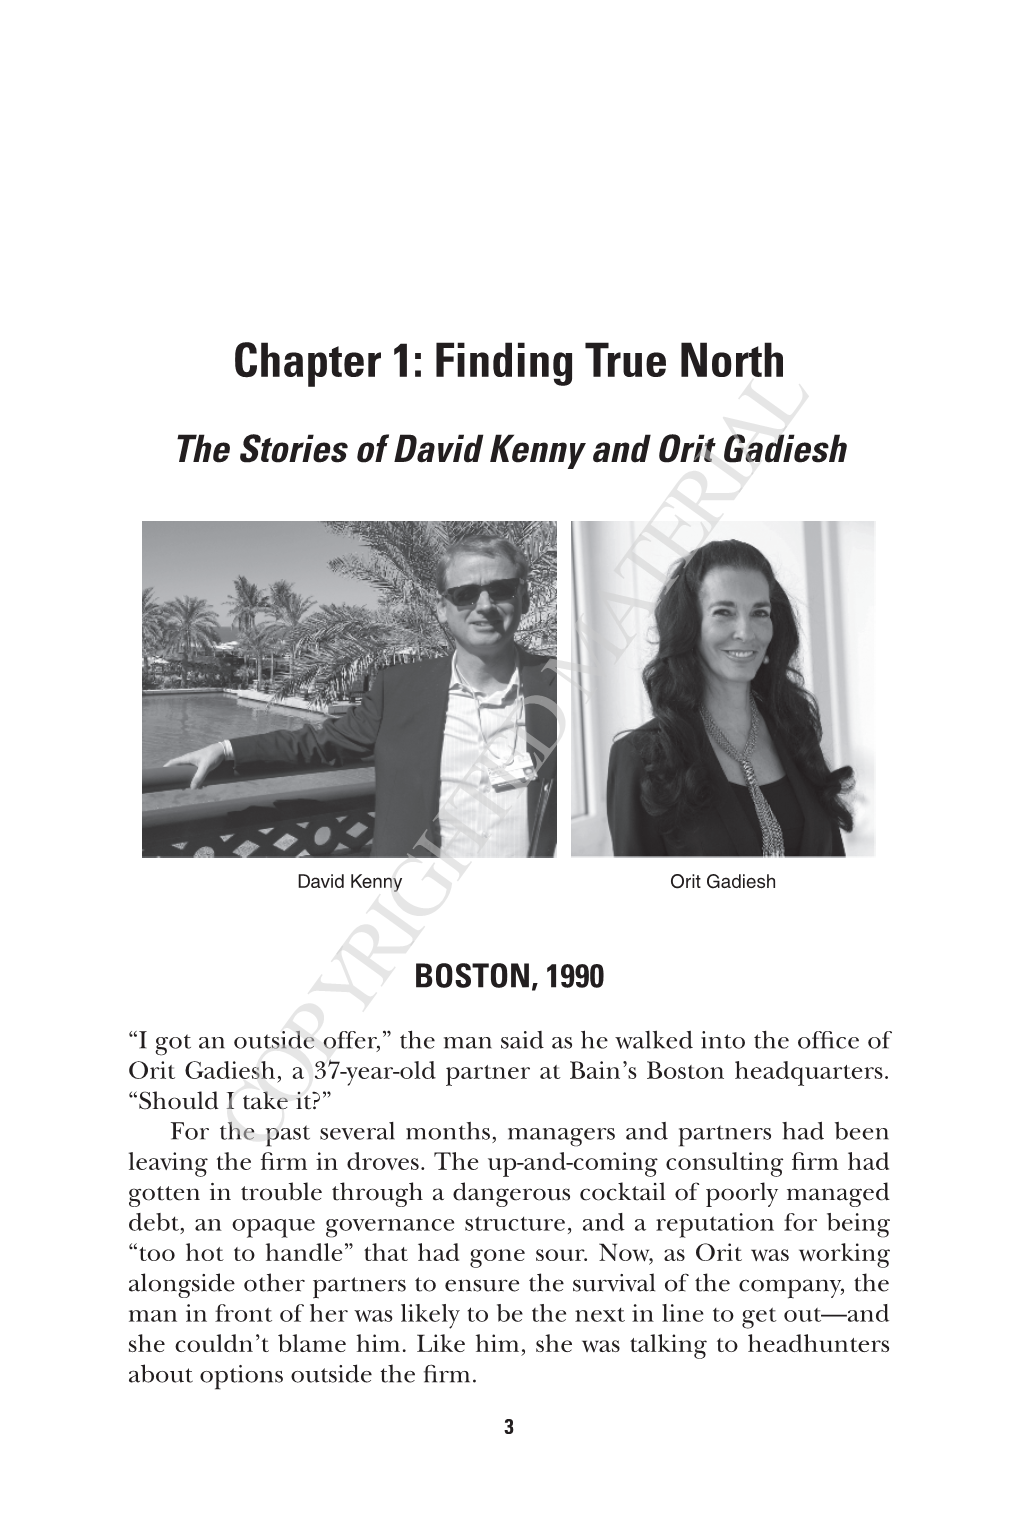 The Stories of David Kenny and Orit Gadiesh